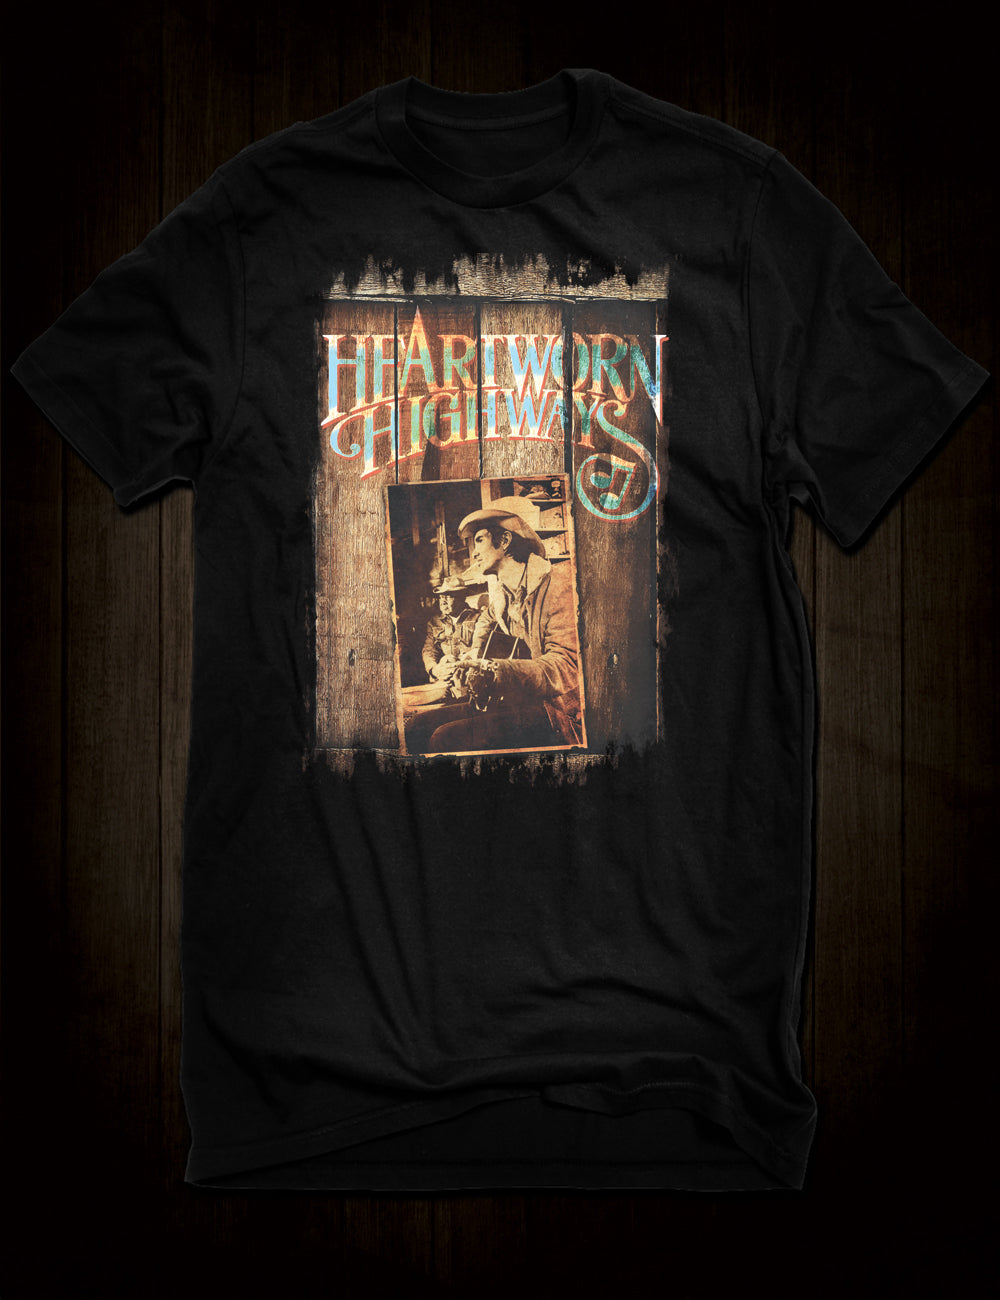 Outlaw Country Music T-Shirt Heartworn Highways Film